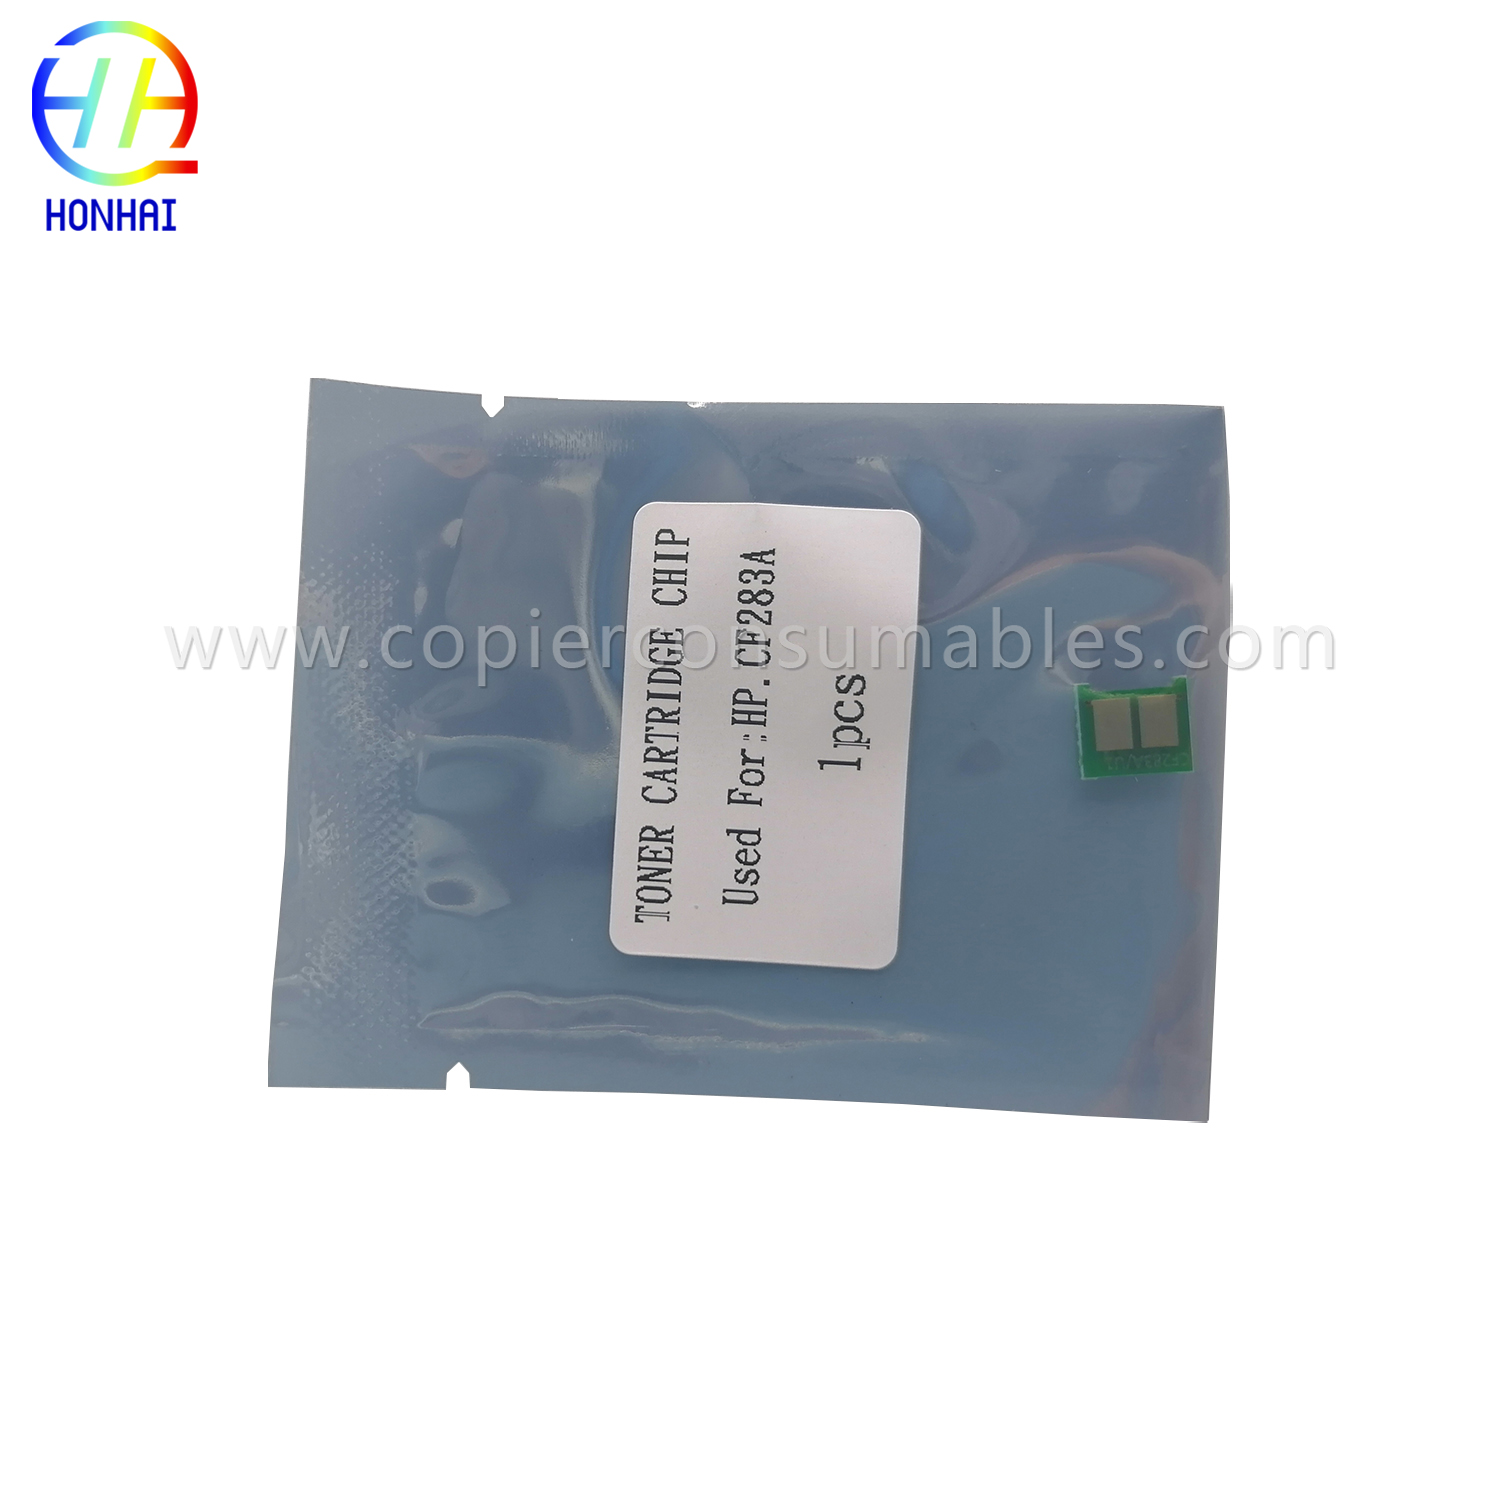 Toner Chip for HP Pro 400 CF280A